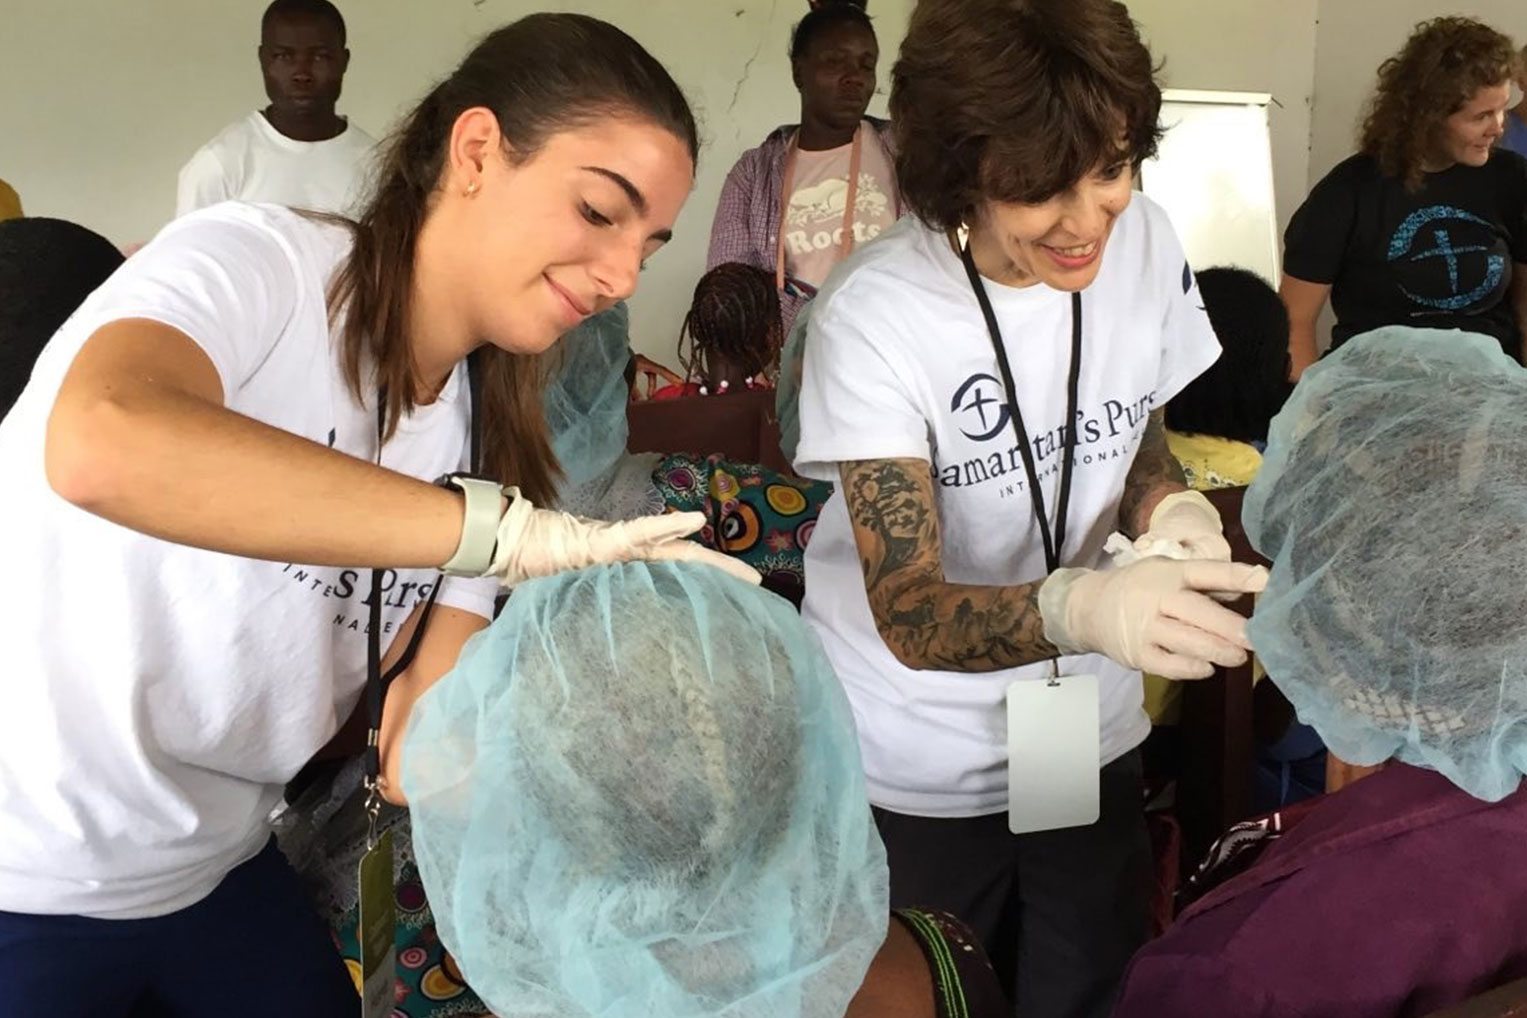 Our medical team got to celebrate with cataract patients in Liberia as they removed their dressings after surgery.